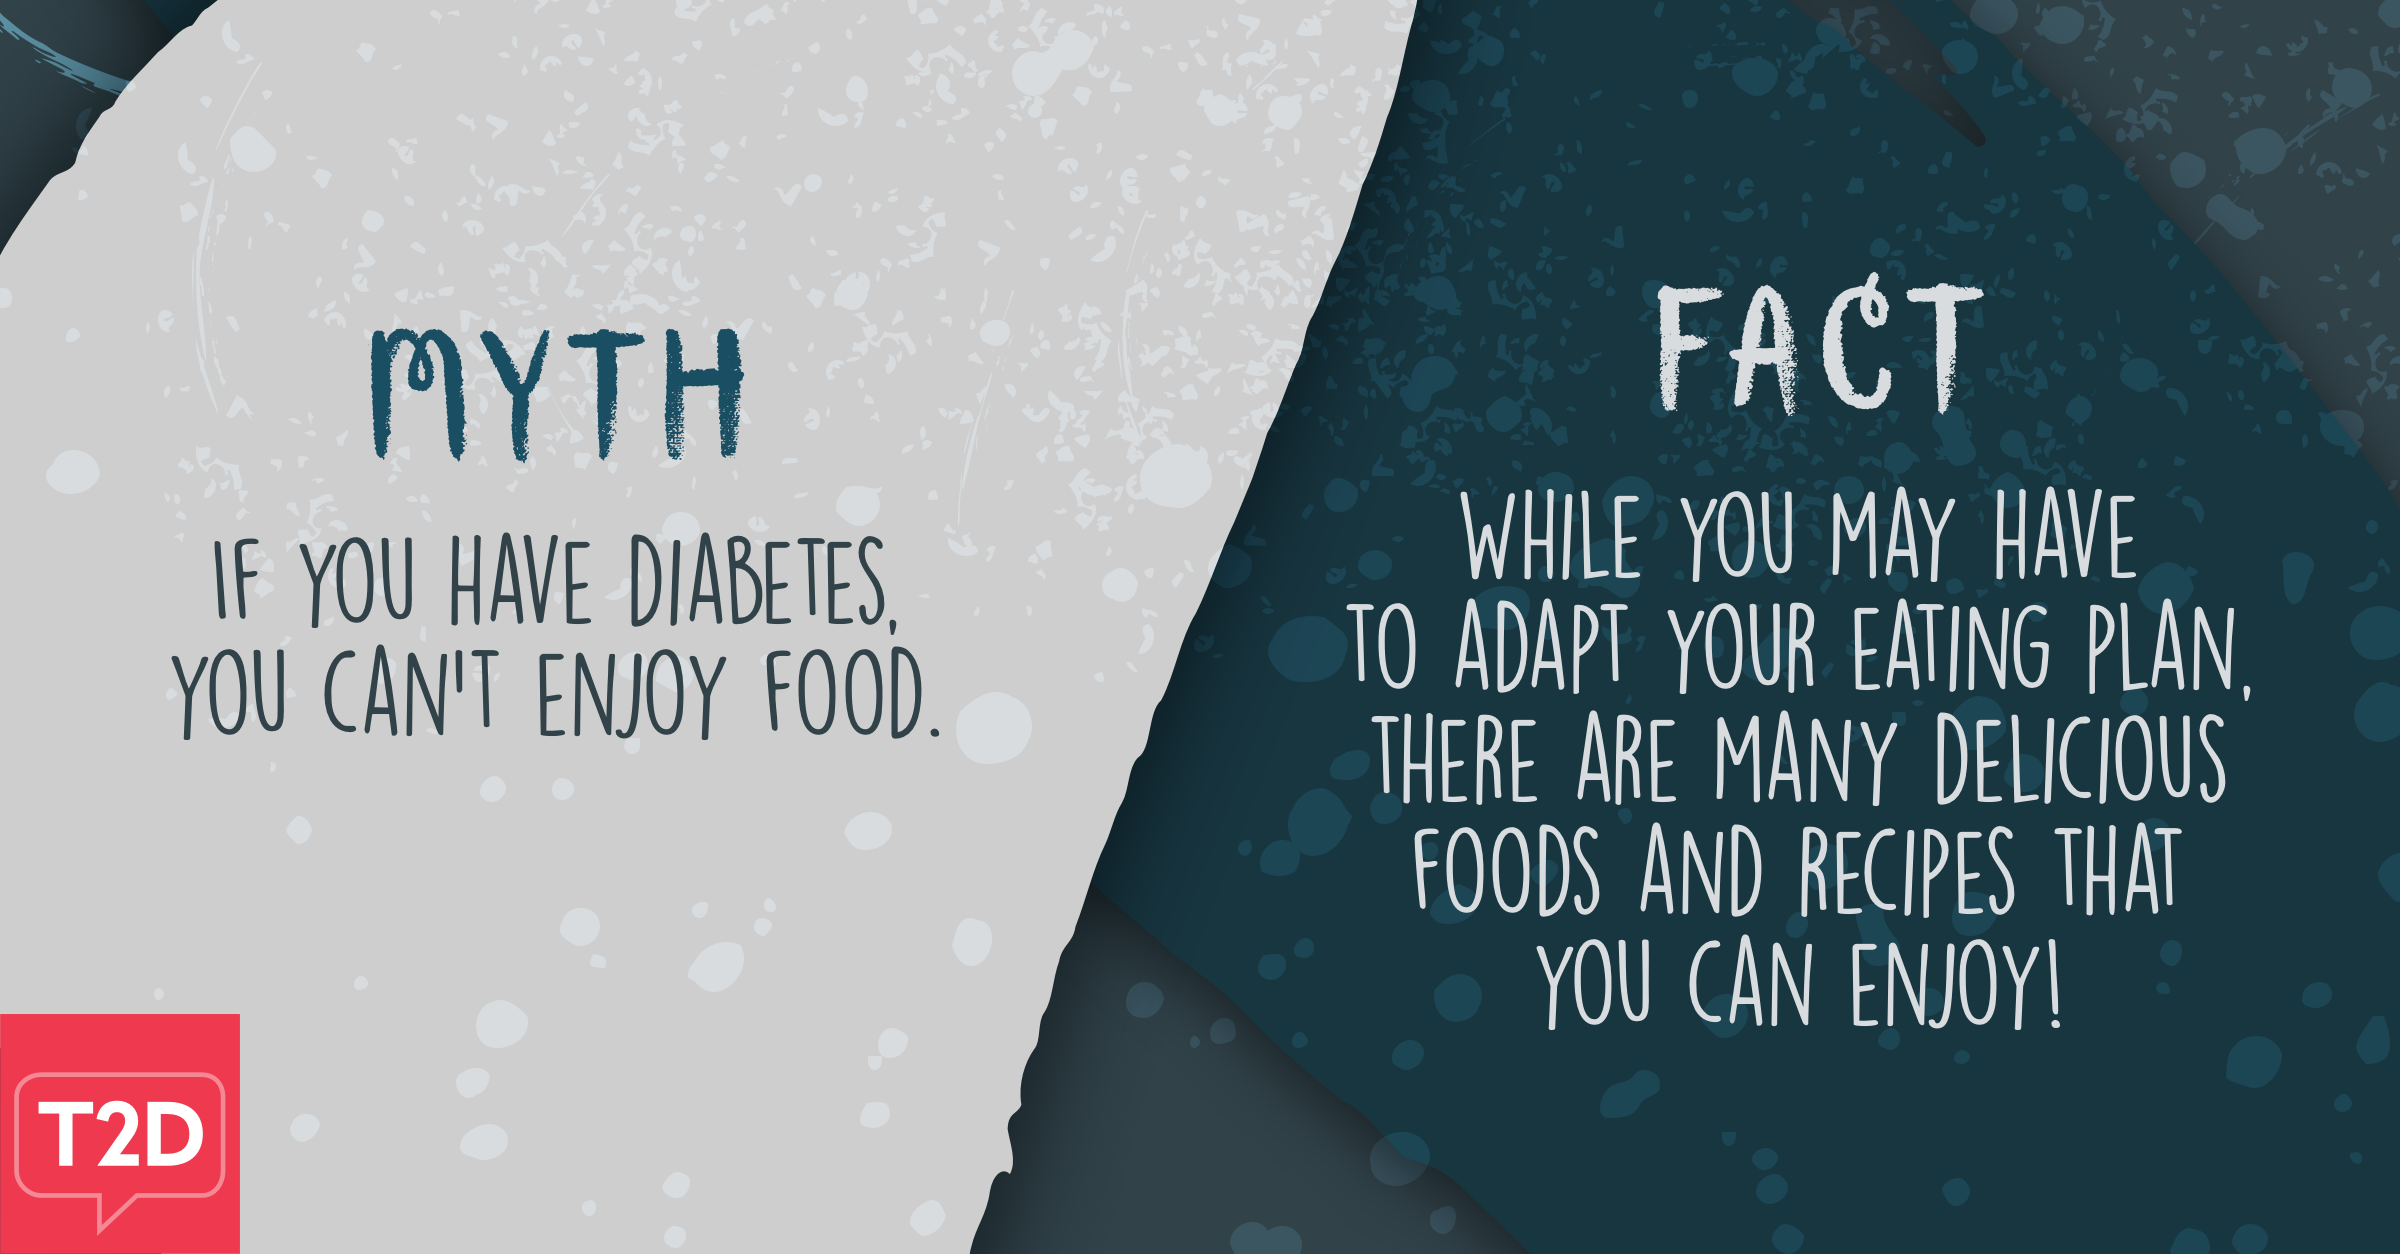 Myth: If you have diabetes, you can’t enjoy food. Fact: While you may have to adapt your eating plan, there are many delicious foods and recipes that you can enjoy! 